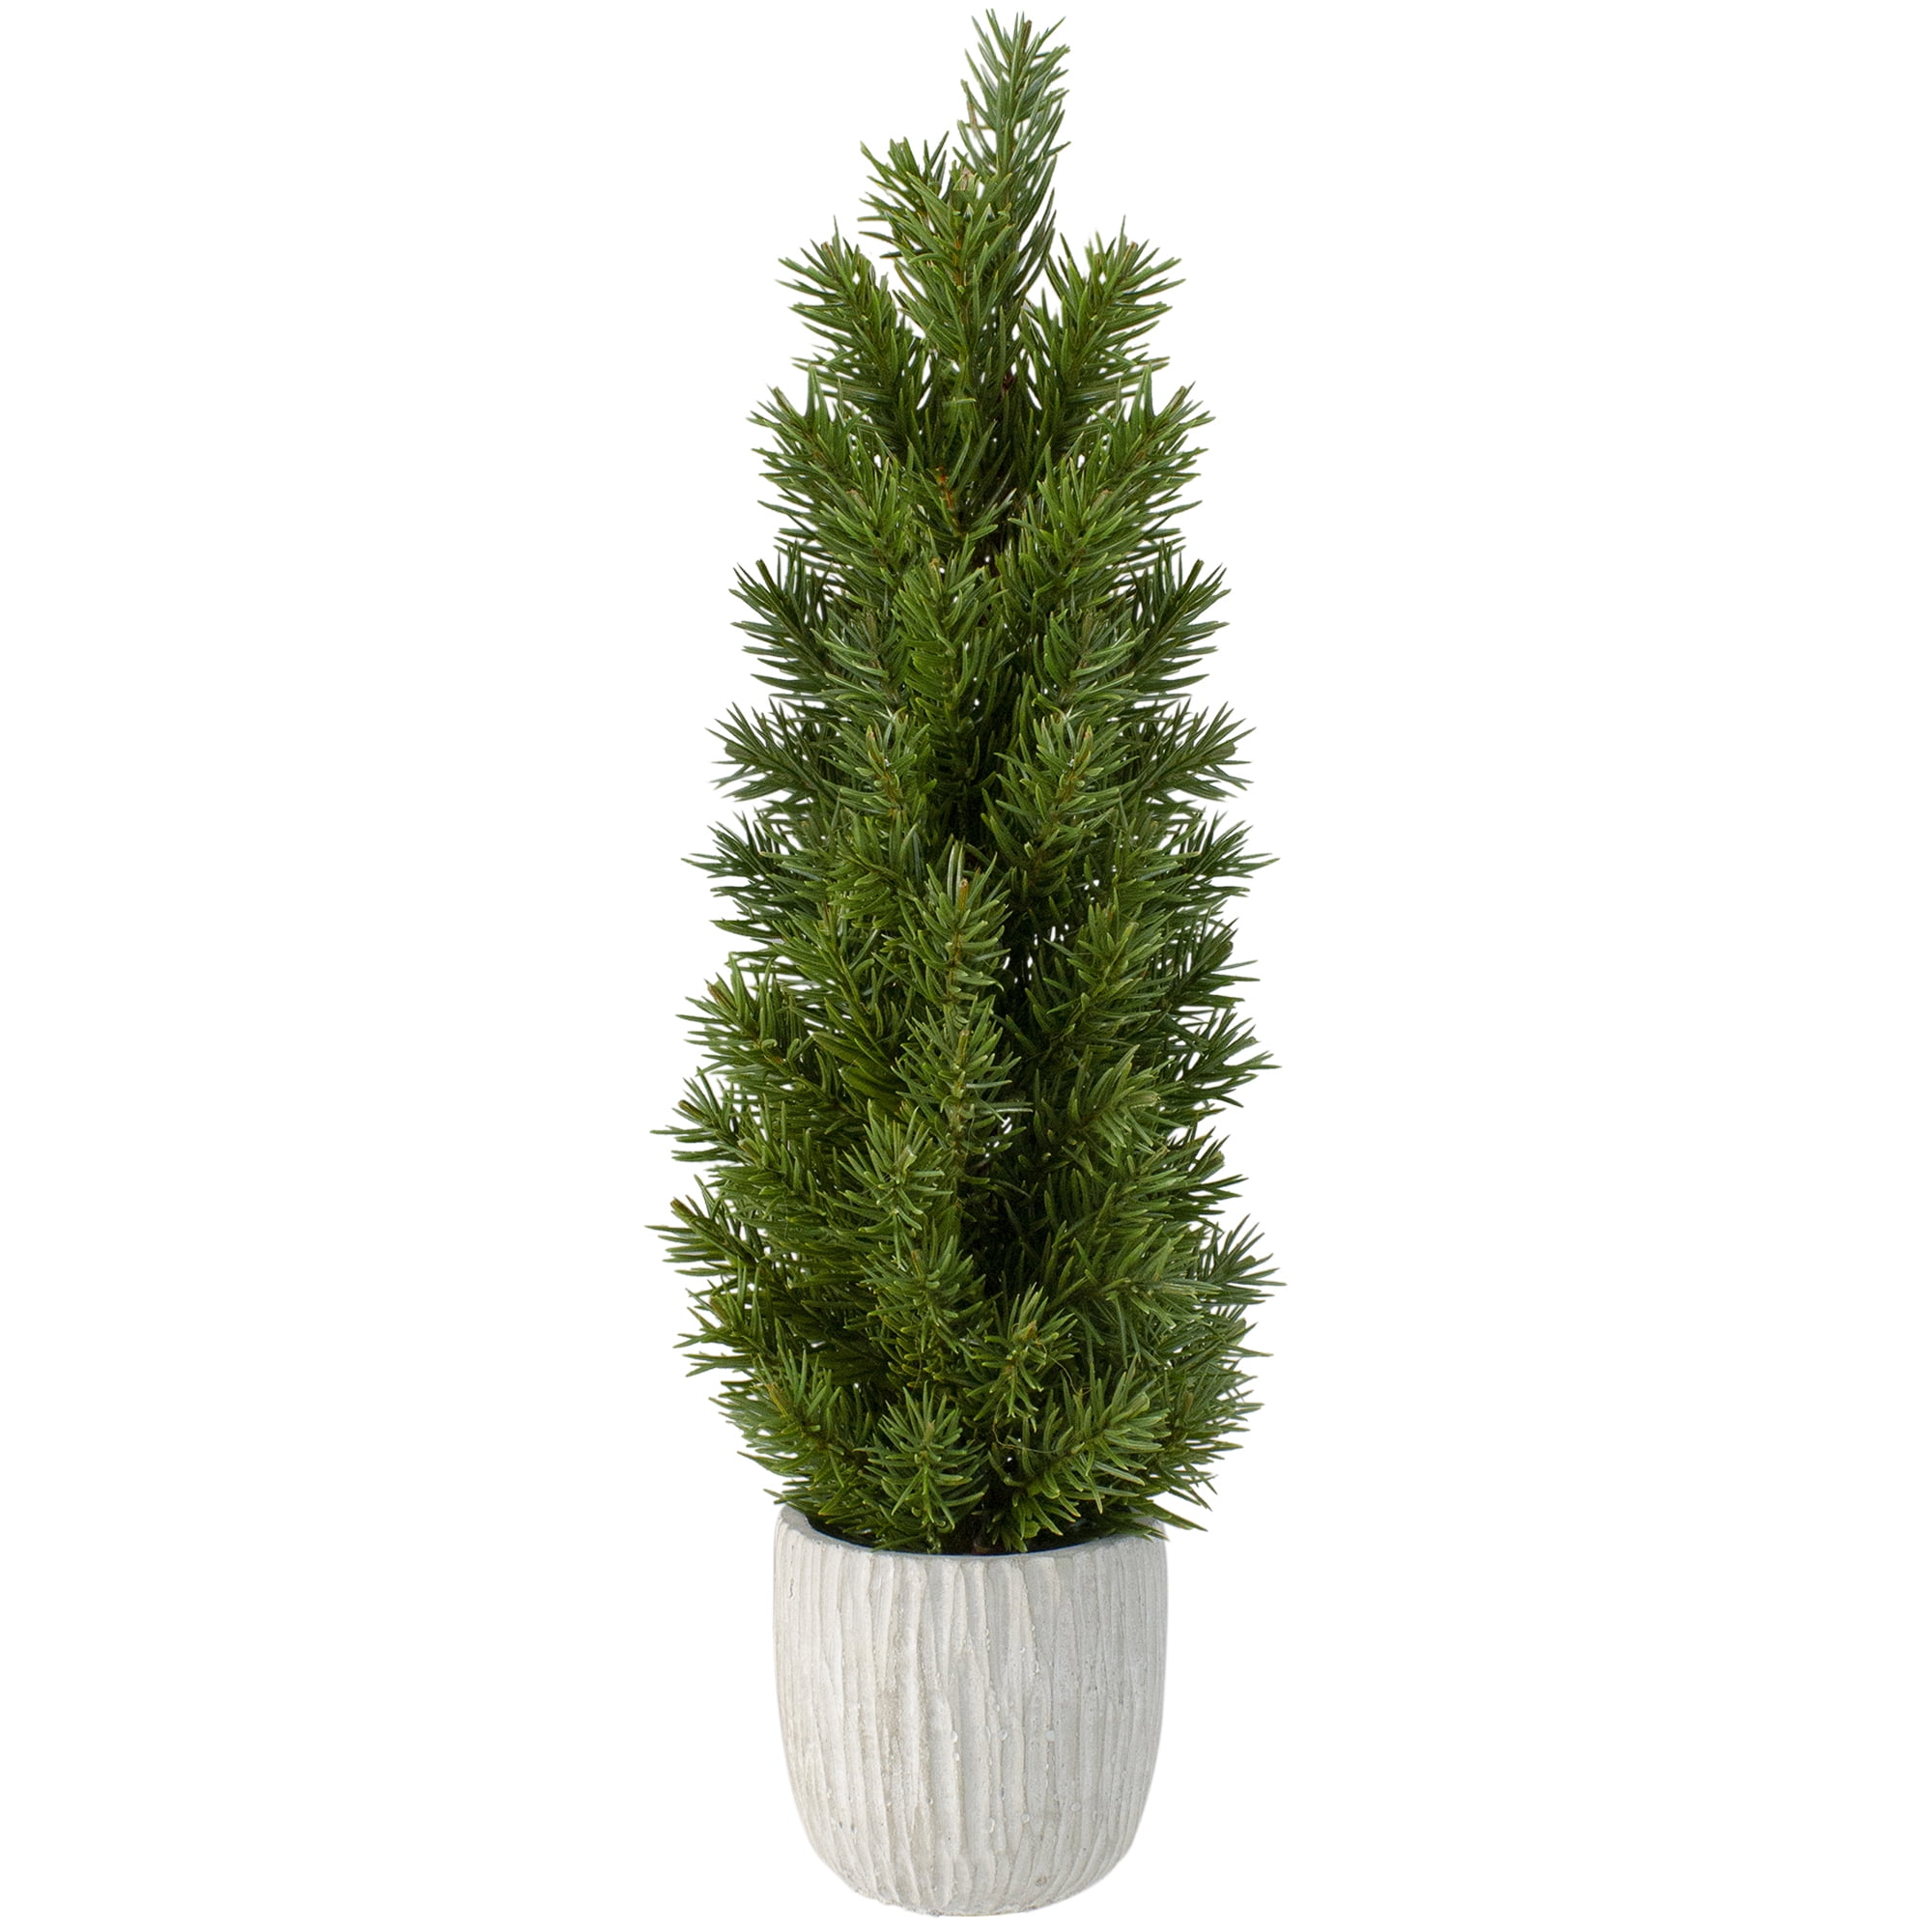 Northlight Assorted Color Potted Pine Christmas Tree, 1